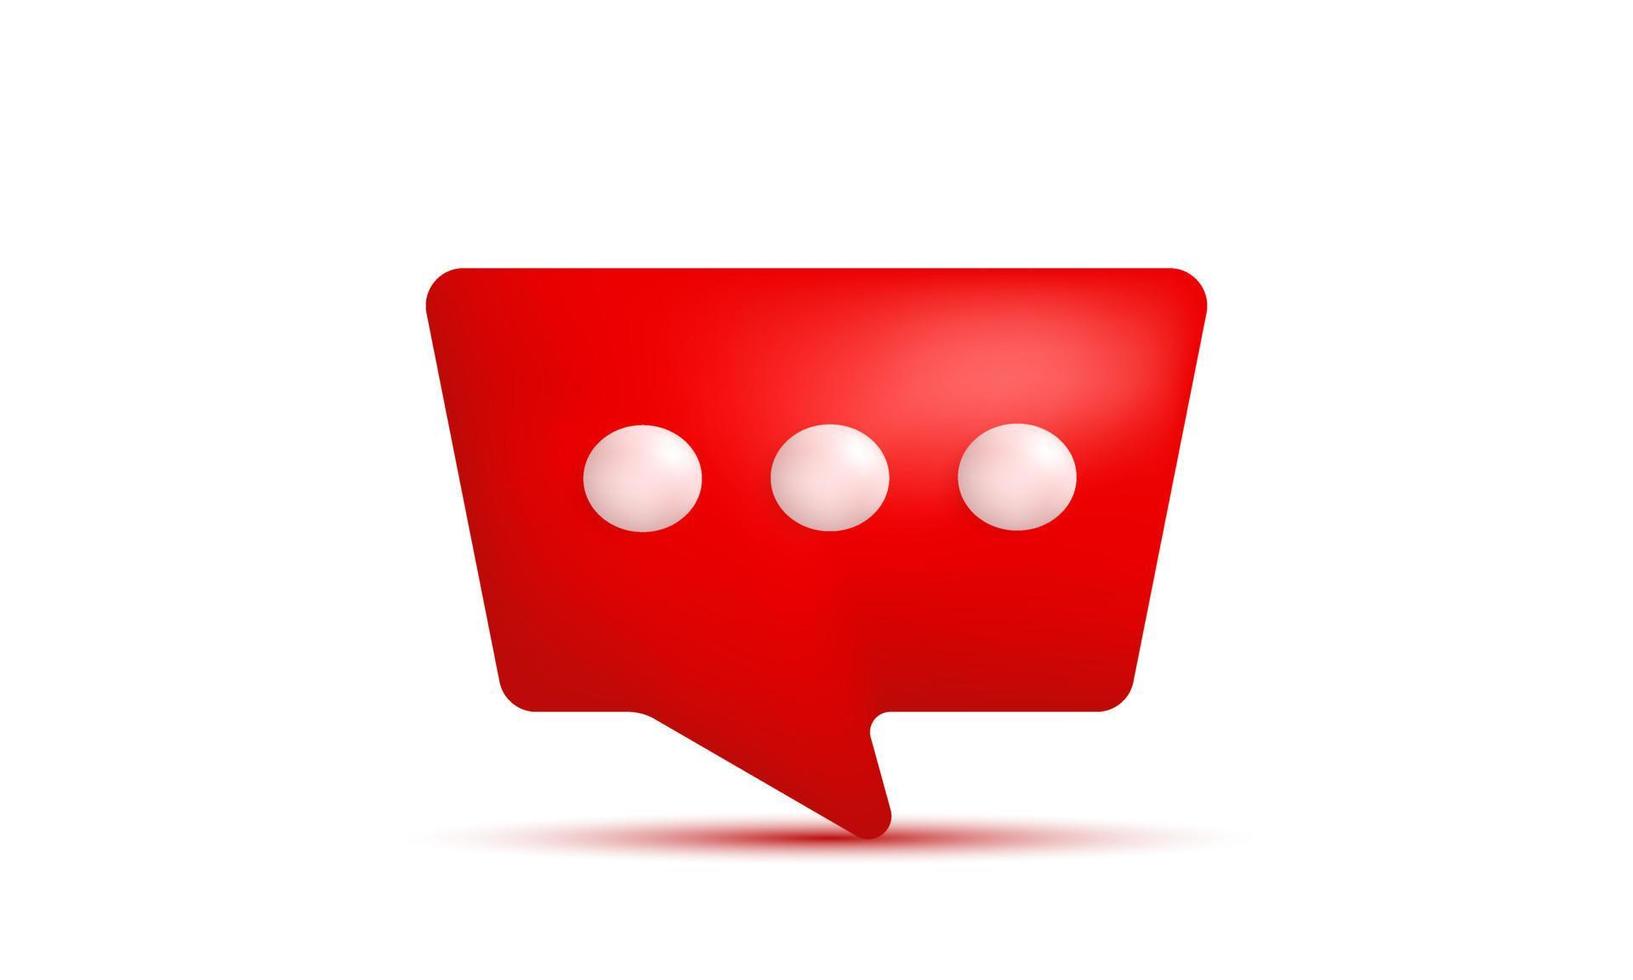 illustration realistic icon 3d red bubble message chat isolated on background vector